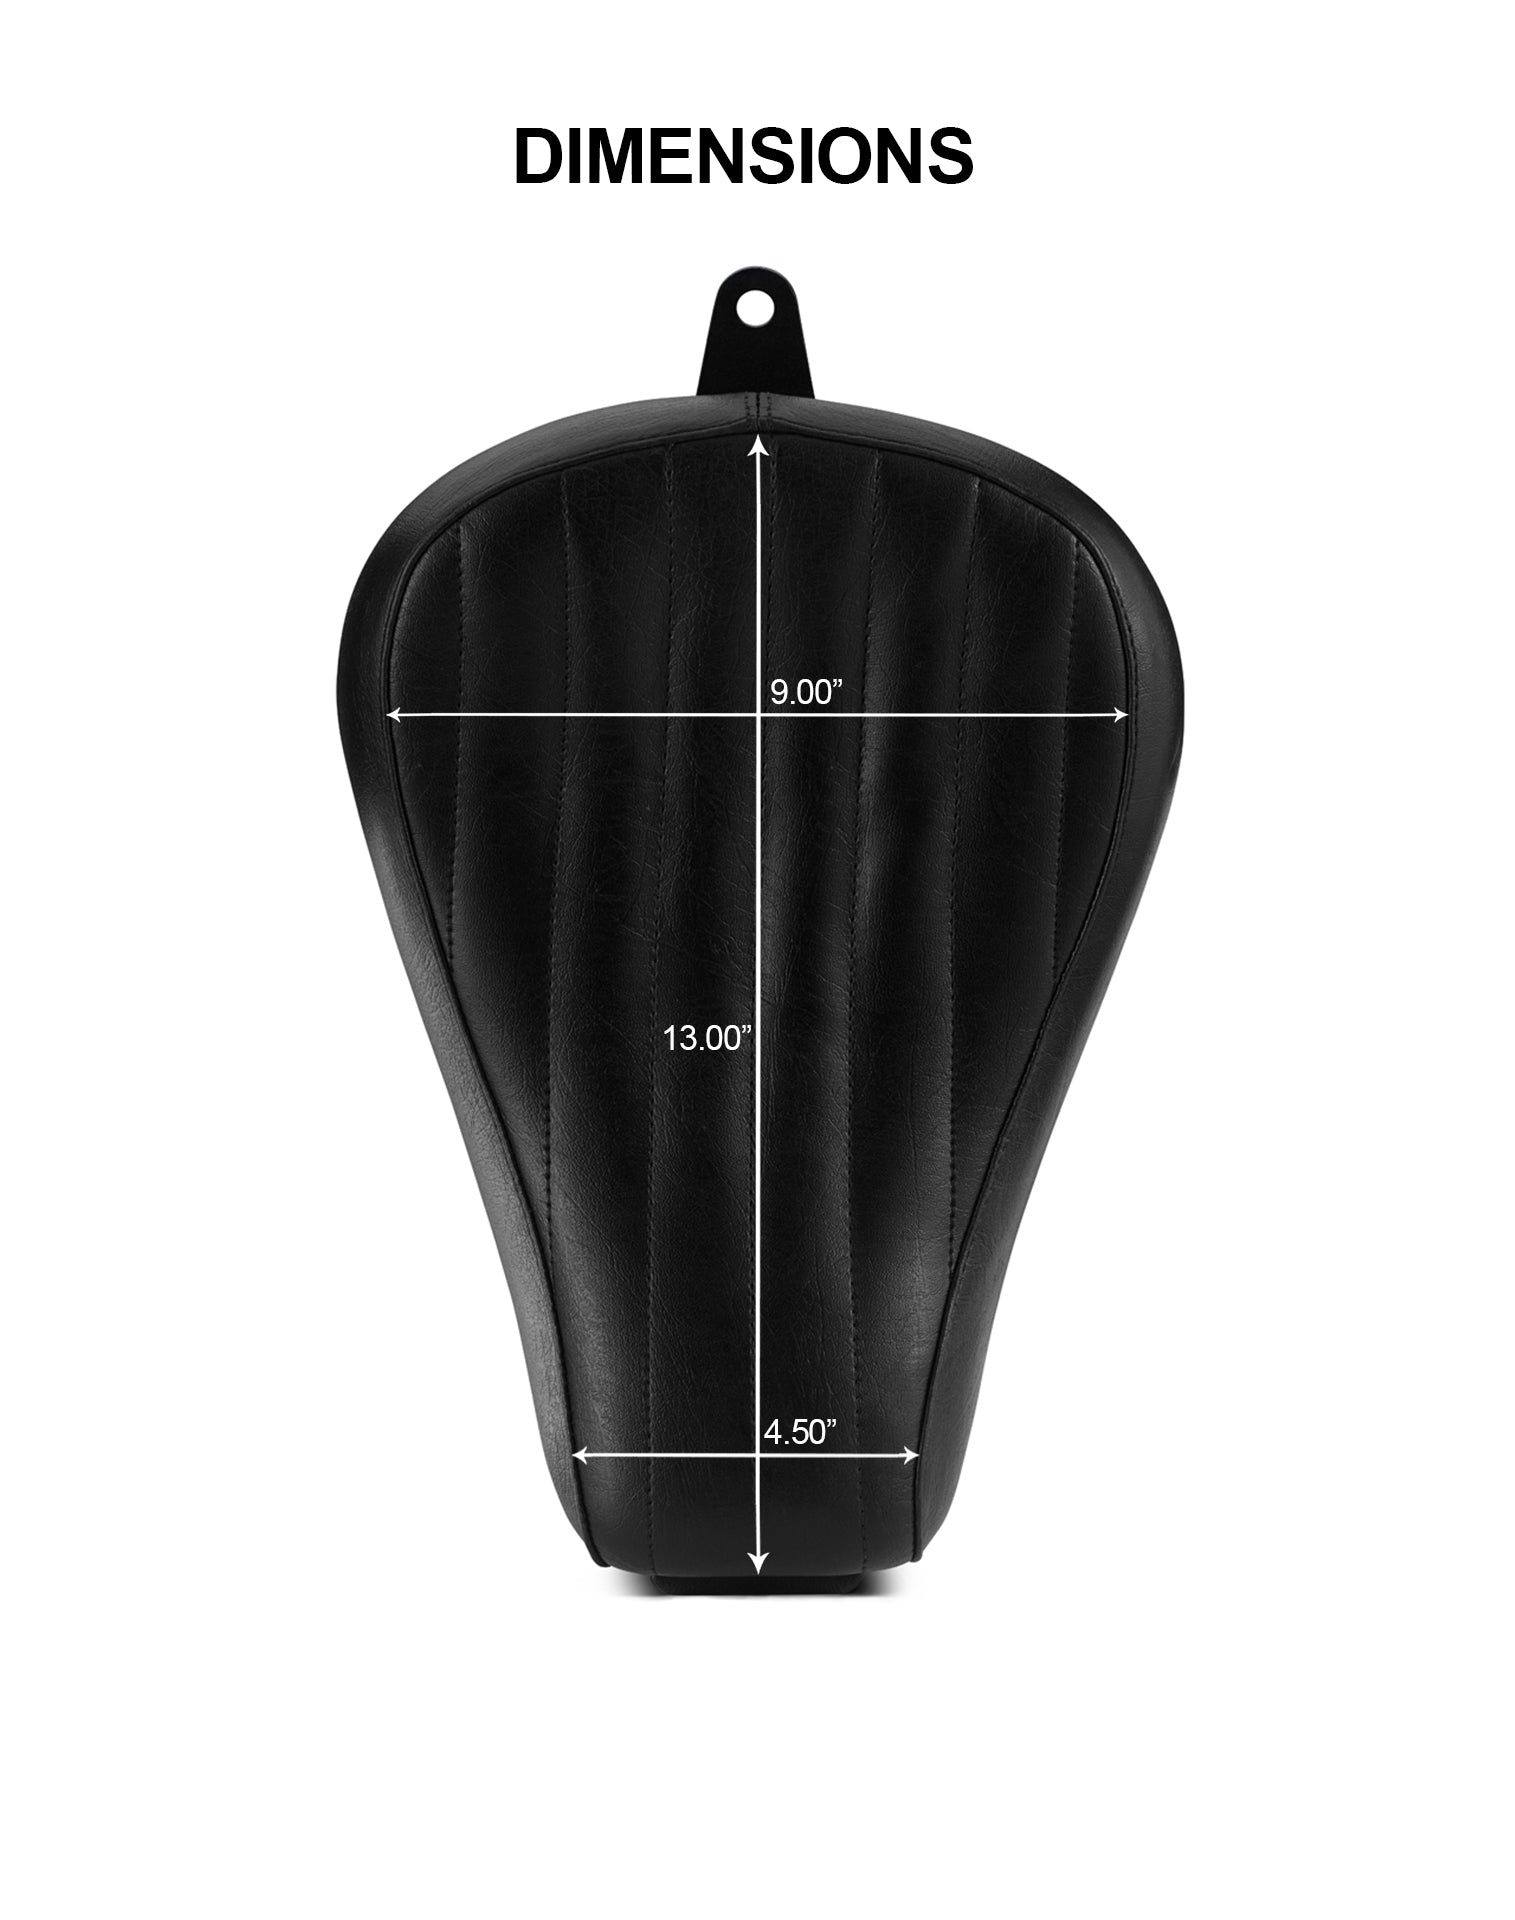 Iron Born Vertical Stitch Motorcycle Solo Seat for Harley Sportster Super Low 1200T Seat Dimensions